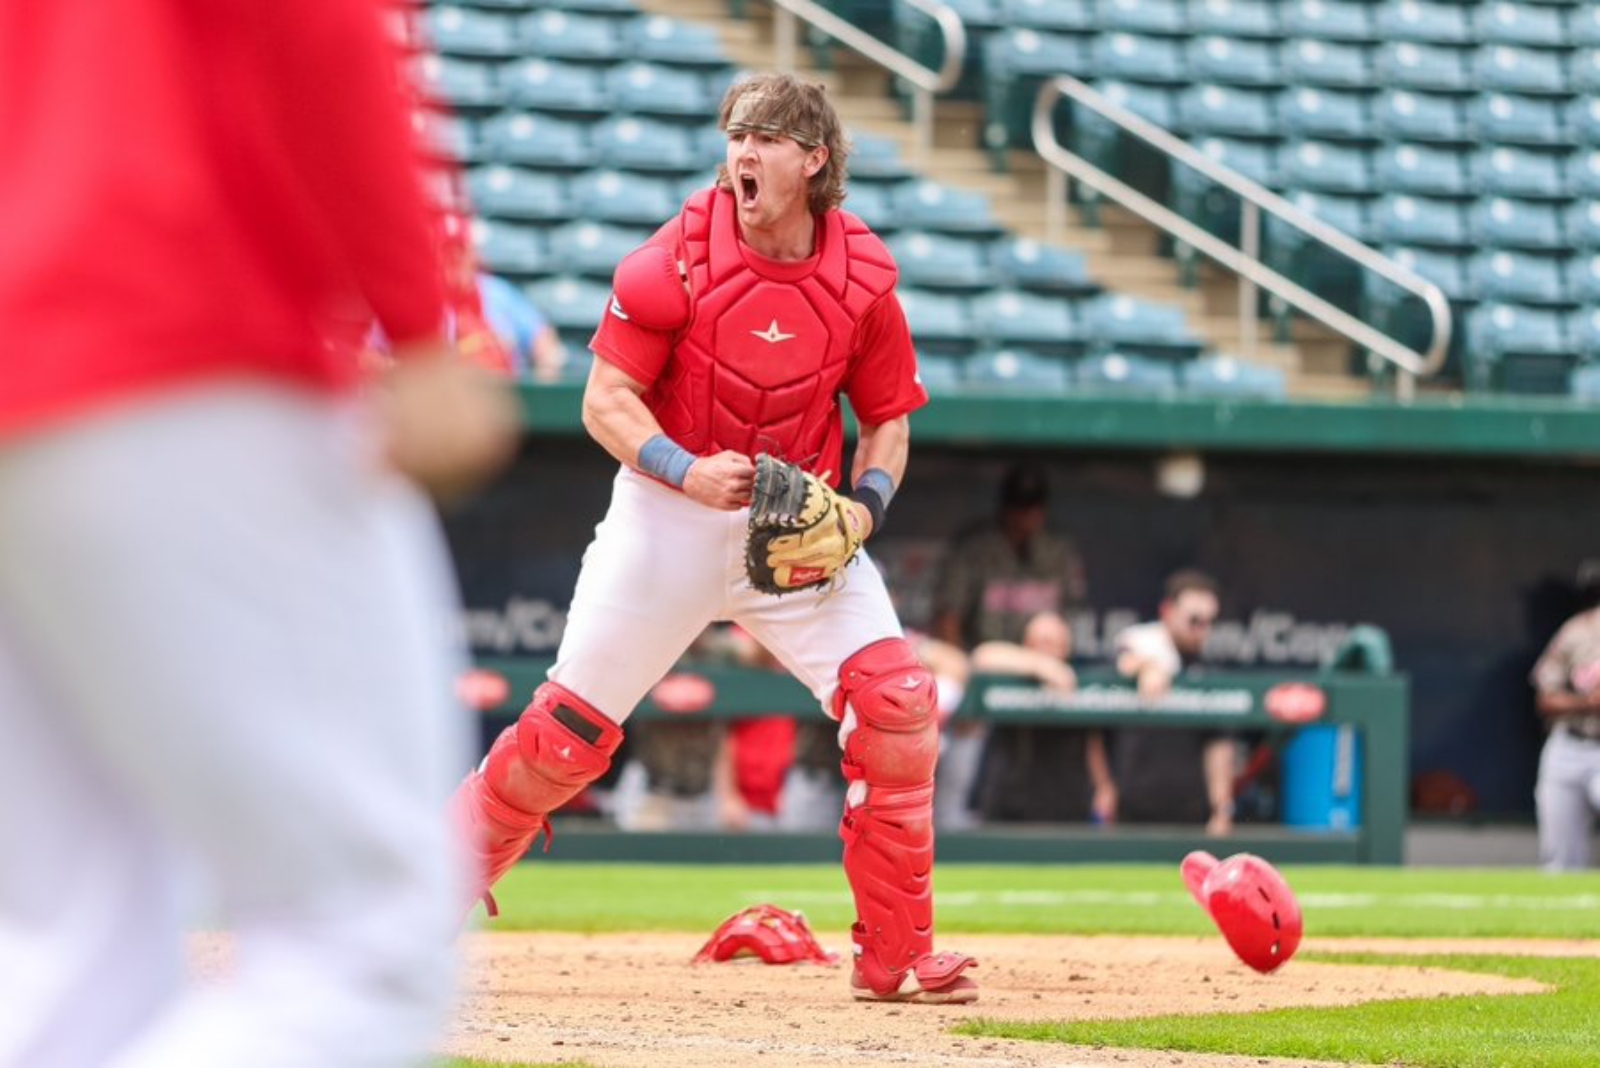 Wade Stauss, wearing catcher's gear and a Springfield Cardinals uniform, celebrates applying the tag for the final out of the Cardinals’ 7-6 victory over Arkansas on April 24 at Hammons Field.